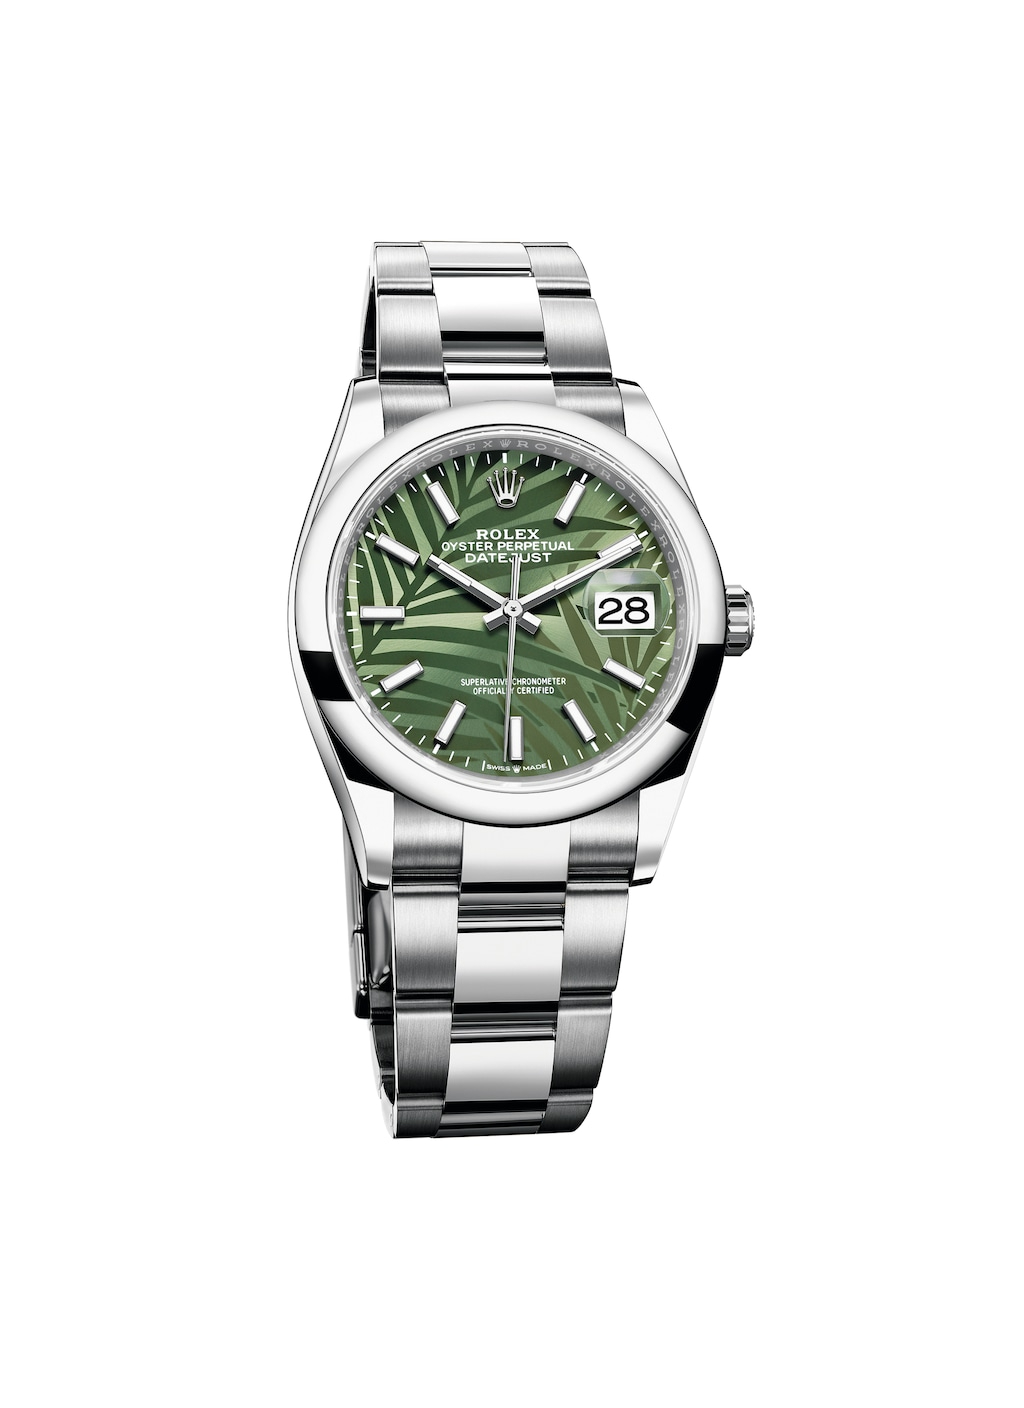 Oyster Perpetual Datejust, Rolex